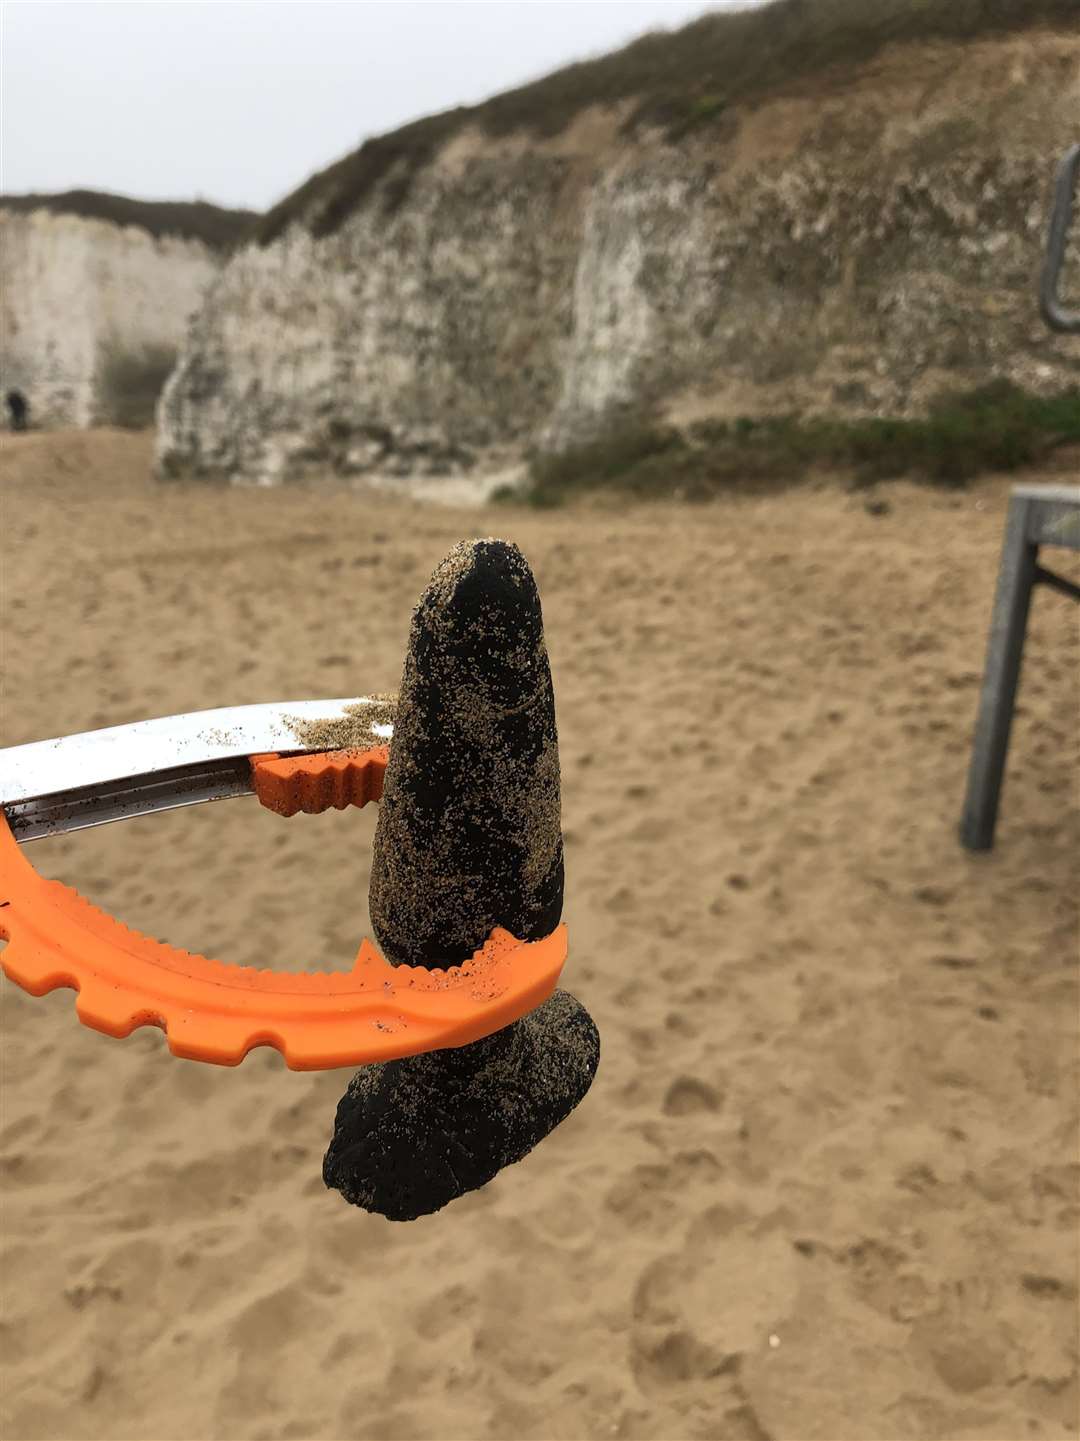 The sex toy discovered on the sand at Botany Bay